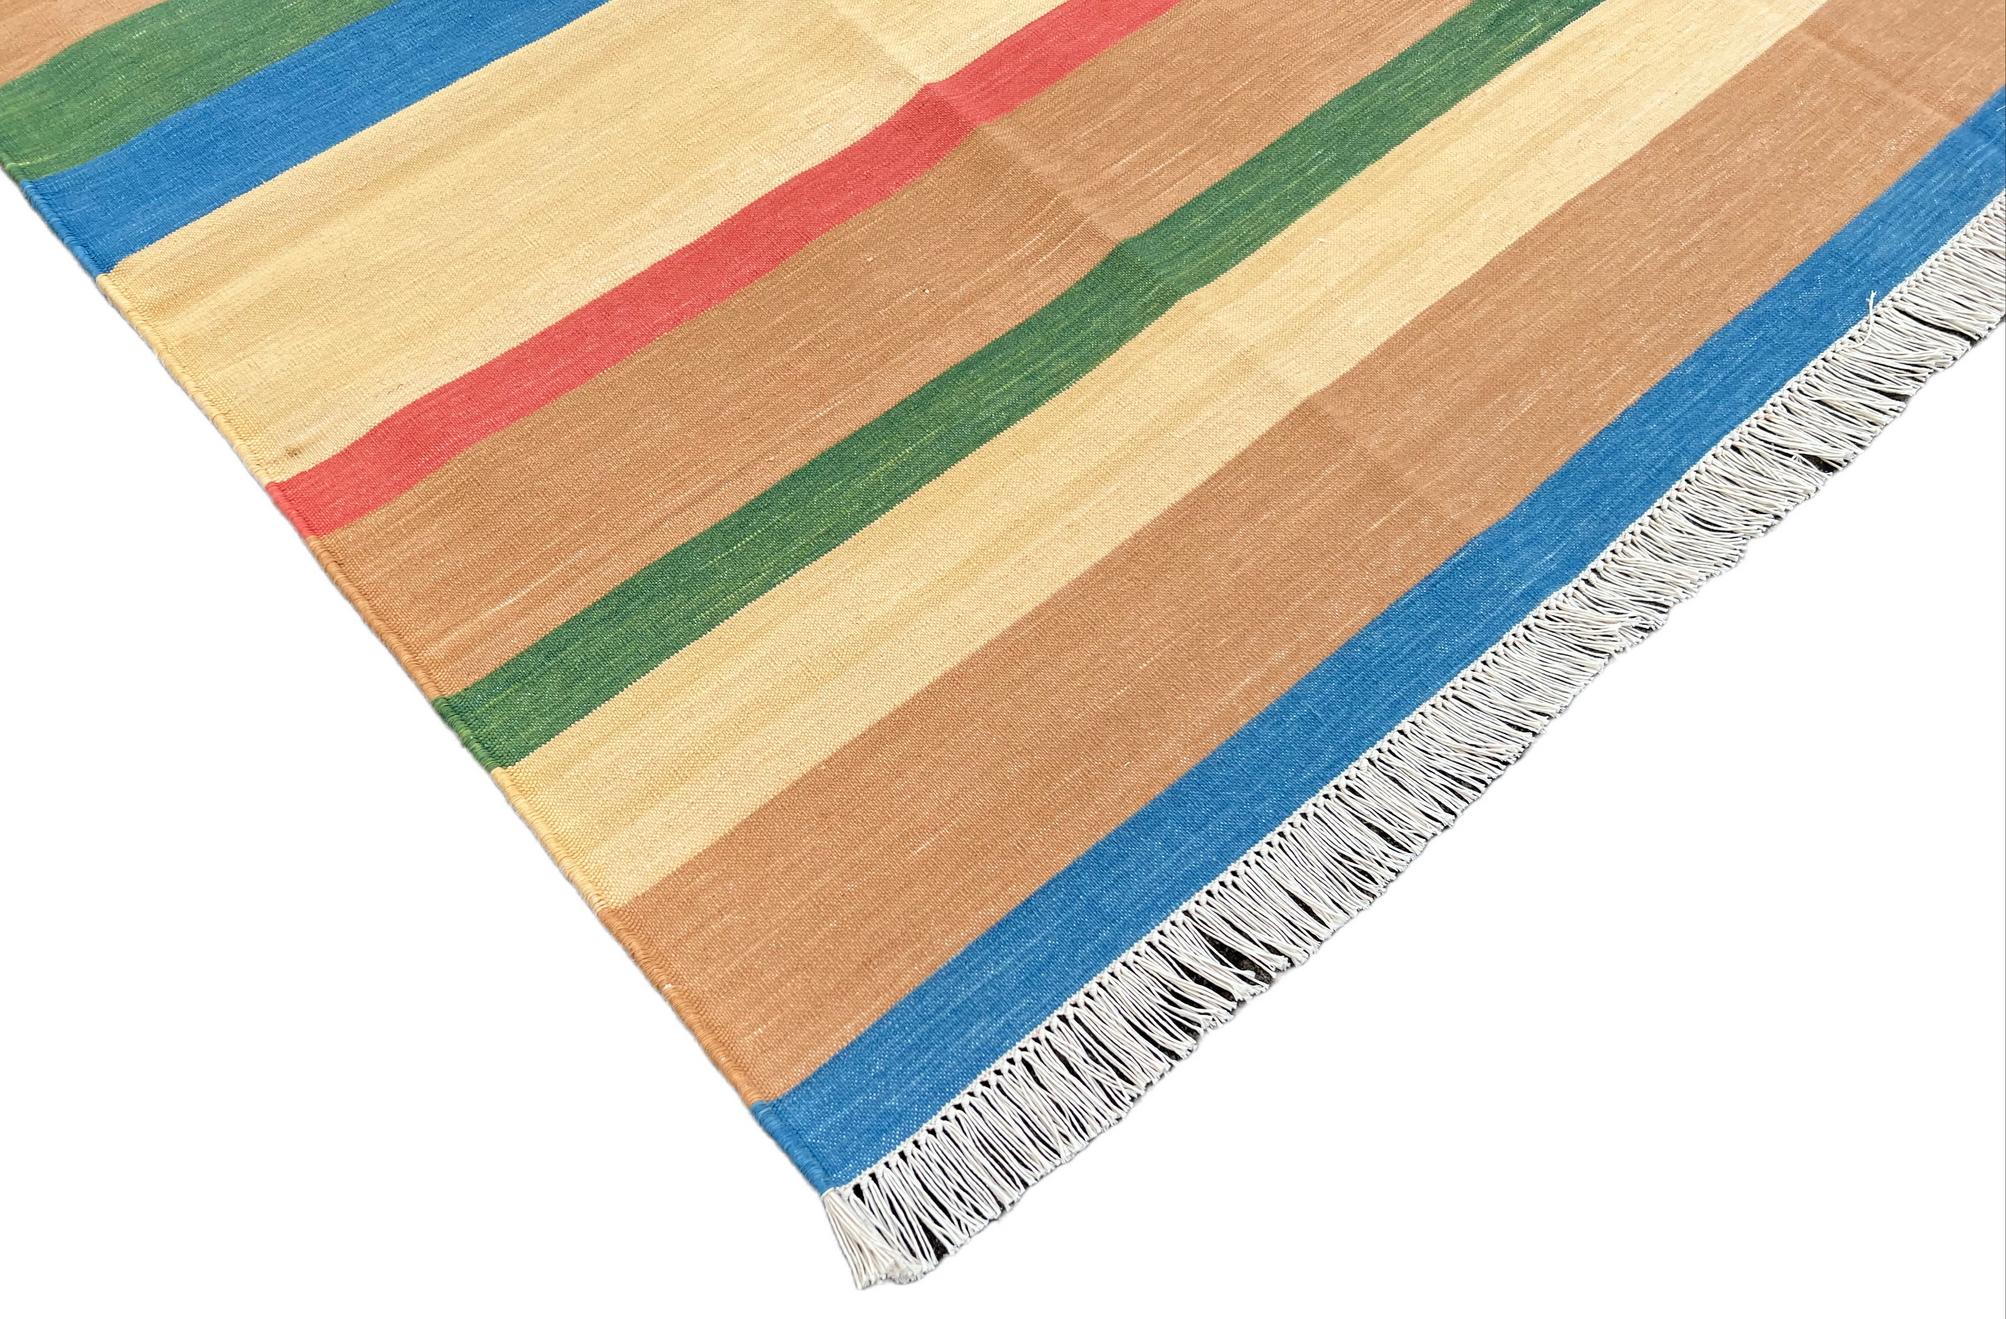 Cotton Vegetable Dyed Tan, Blue, Green And Cream Striped Indian Dhurrie Rug-6'x9' 
These special flat-weave dhurries are hand-woven with 15 ply 100% cotton yarn. Due to the special manufacturing techniques used to create our rugs, the size and color